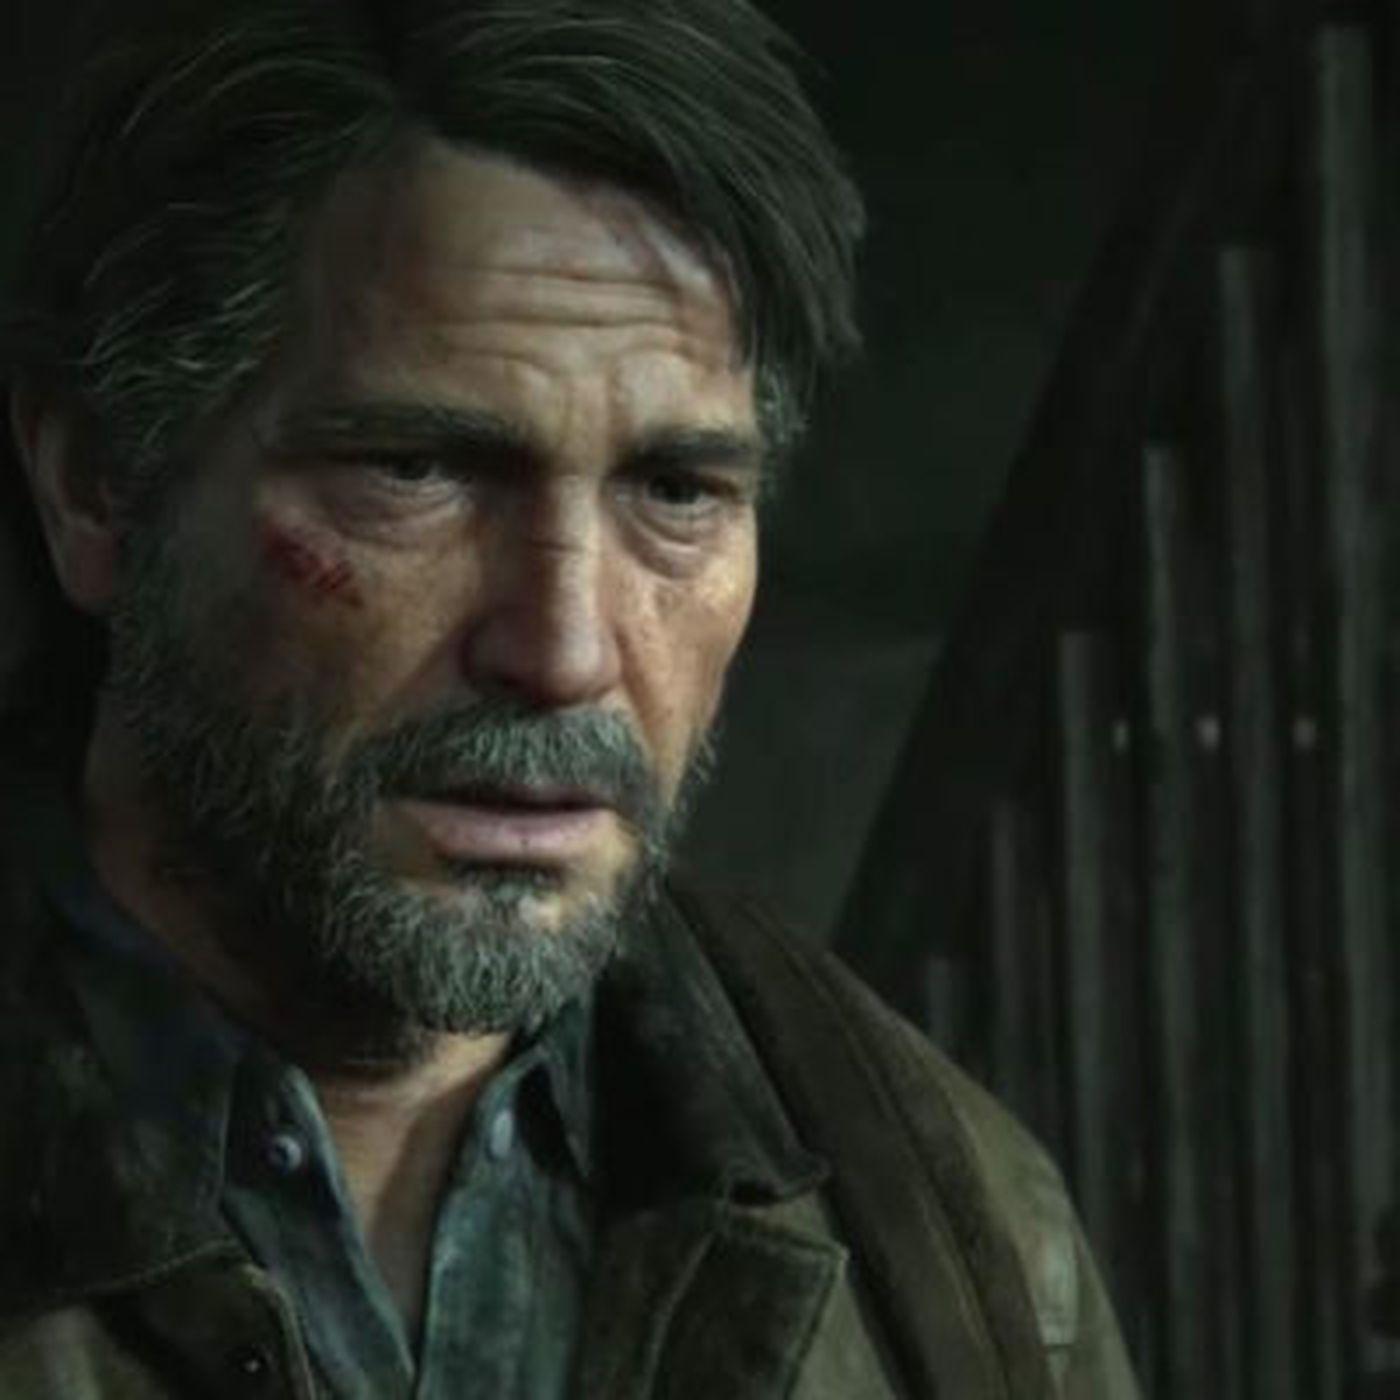 The Last of Us Part II has been delayed until May 2020